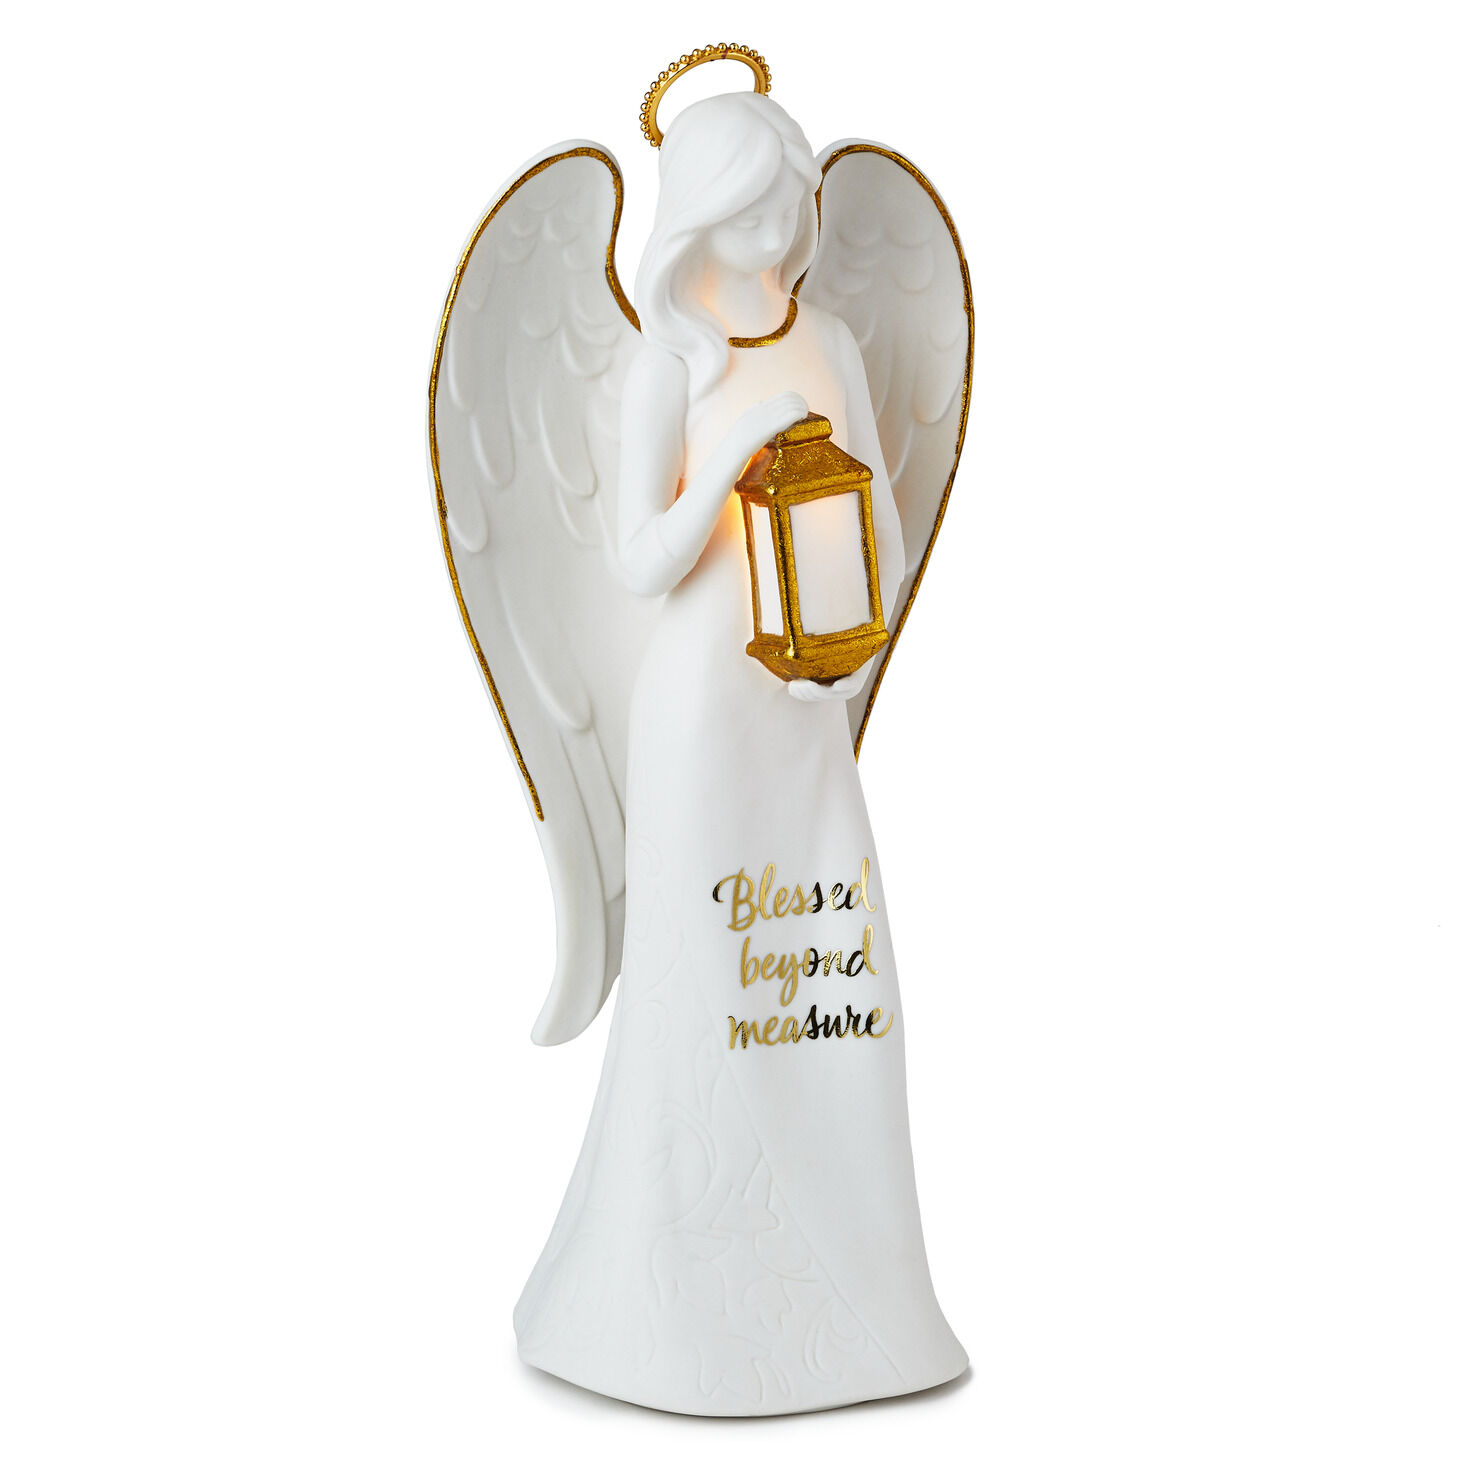 Blessed Beyond Measure Angel Figurine With Light, 12" for only USD 59.99 | Hallmark